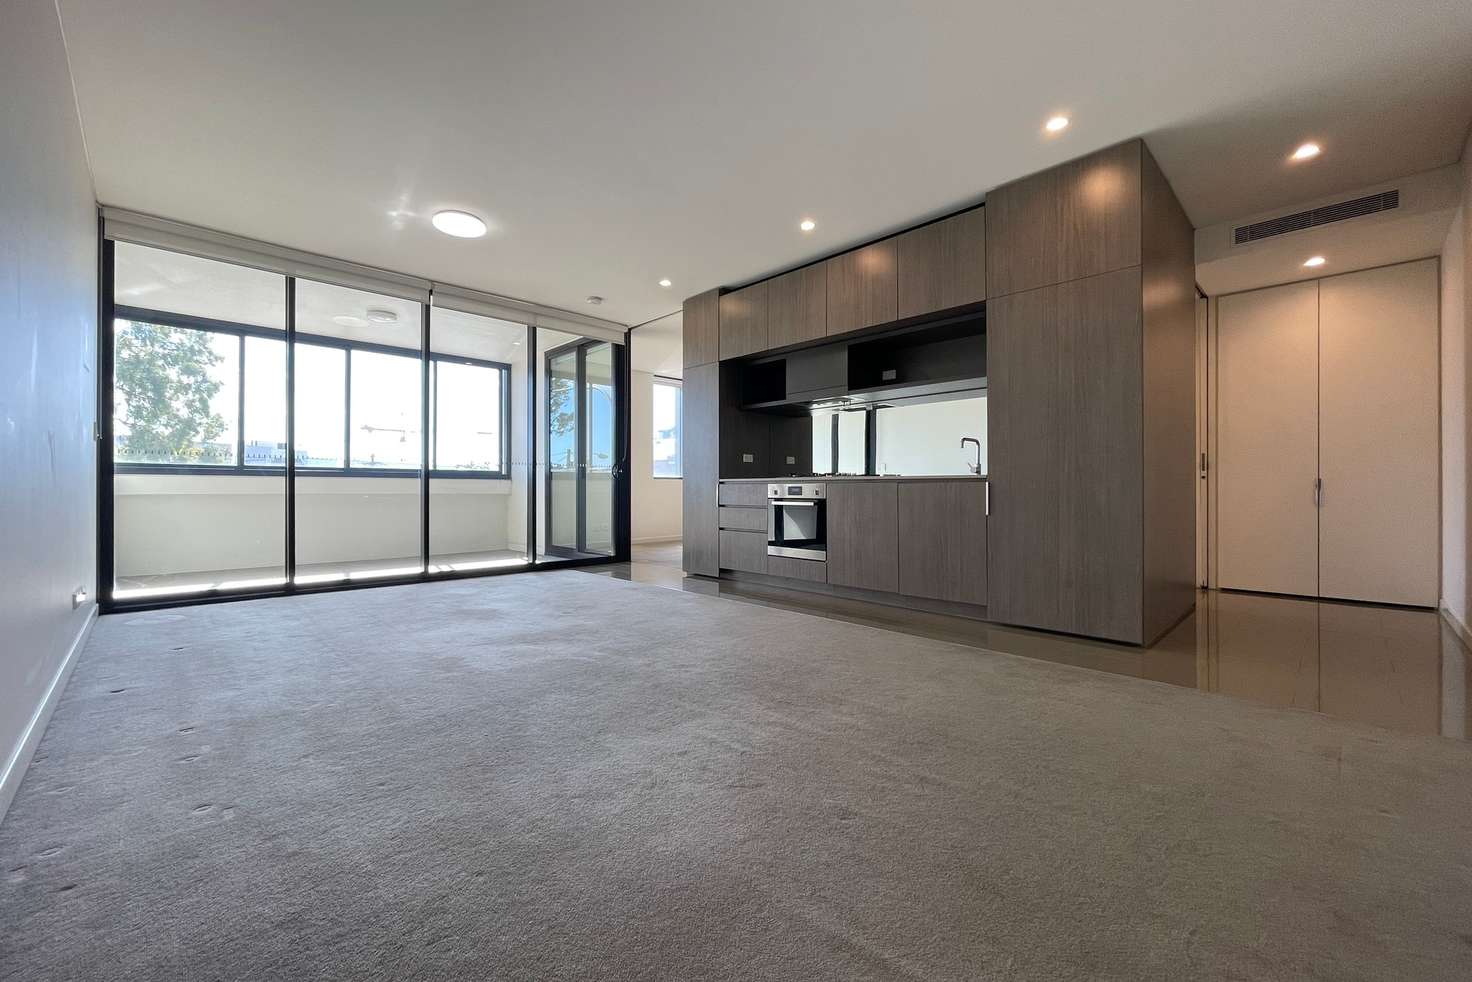 Main view of Homely apartment listing, 312/7 Gantry Lane, Camperdown NSW 2050